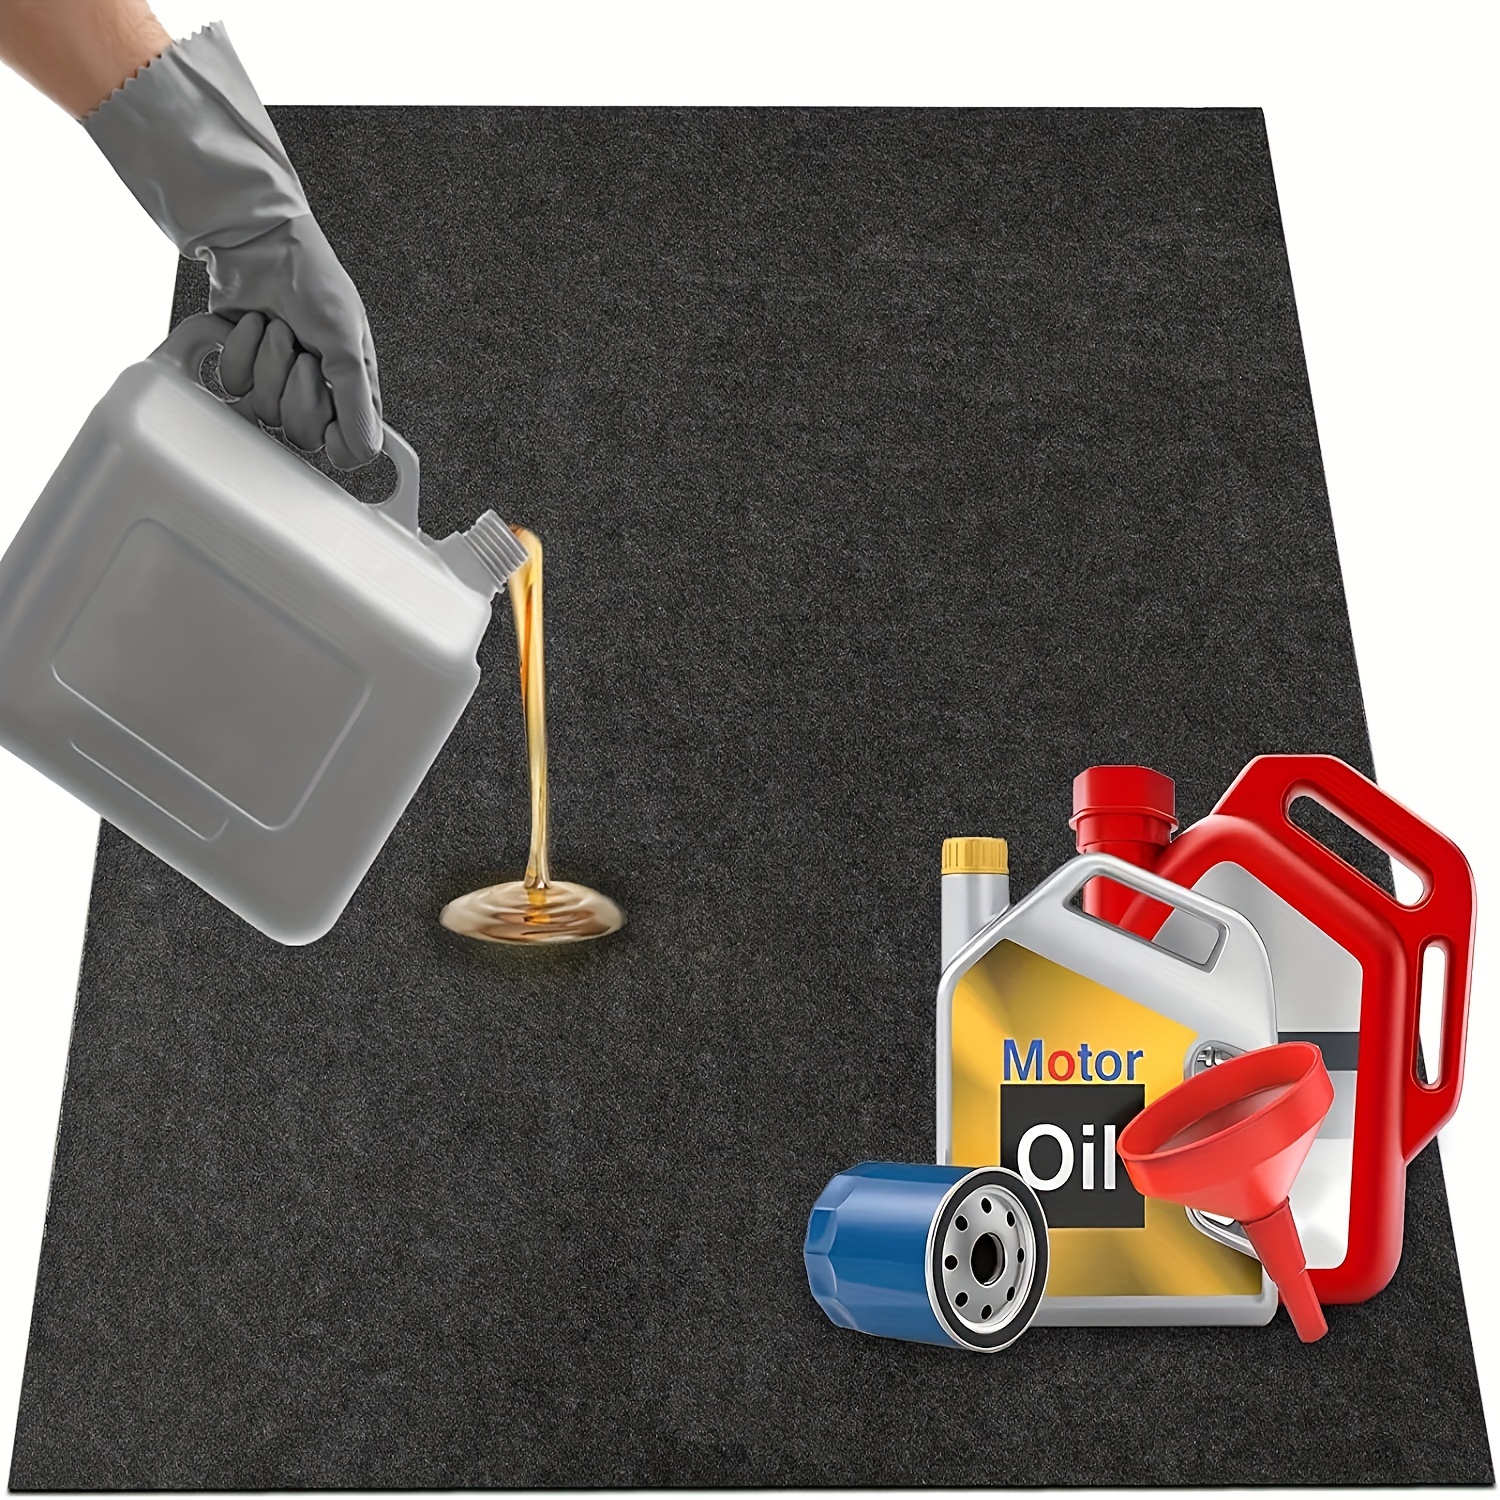 Absorbent Oil Mat in Reusable Washable/ Protects Driveway Surface